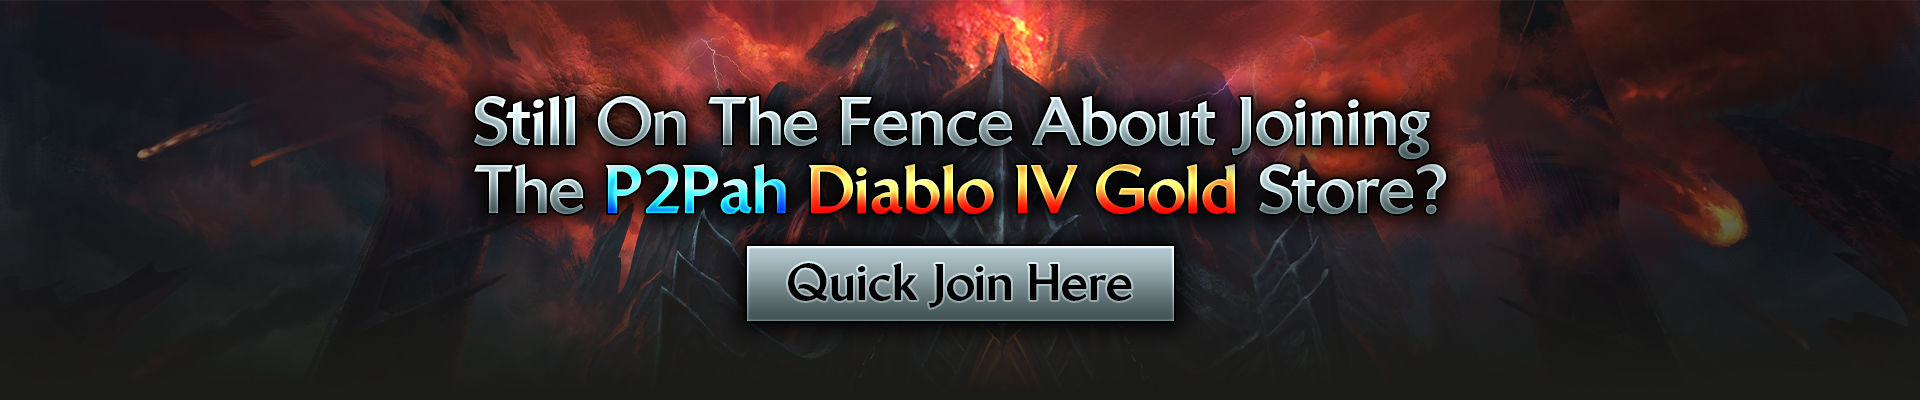 Still On The Fence About Joining The P2Pah Diablo 